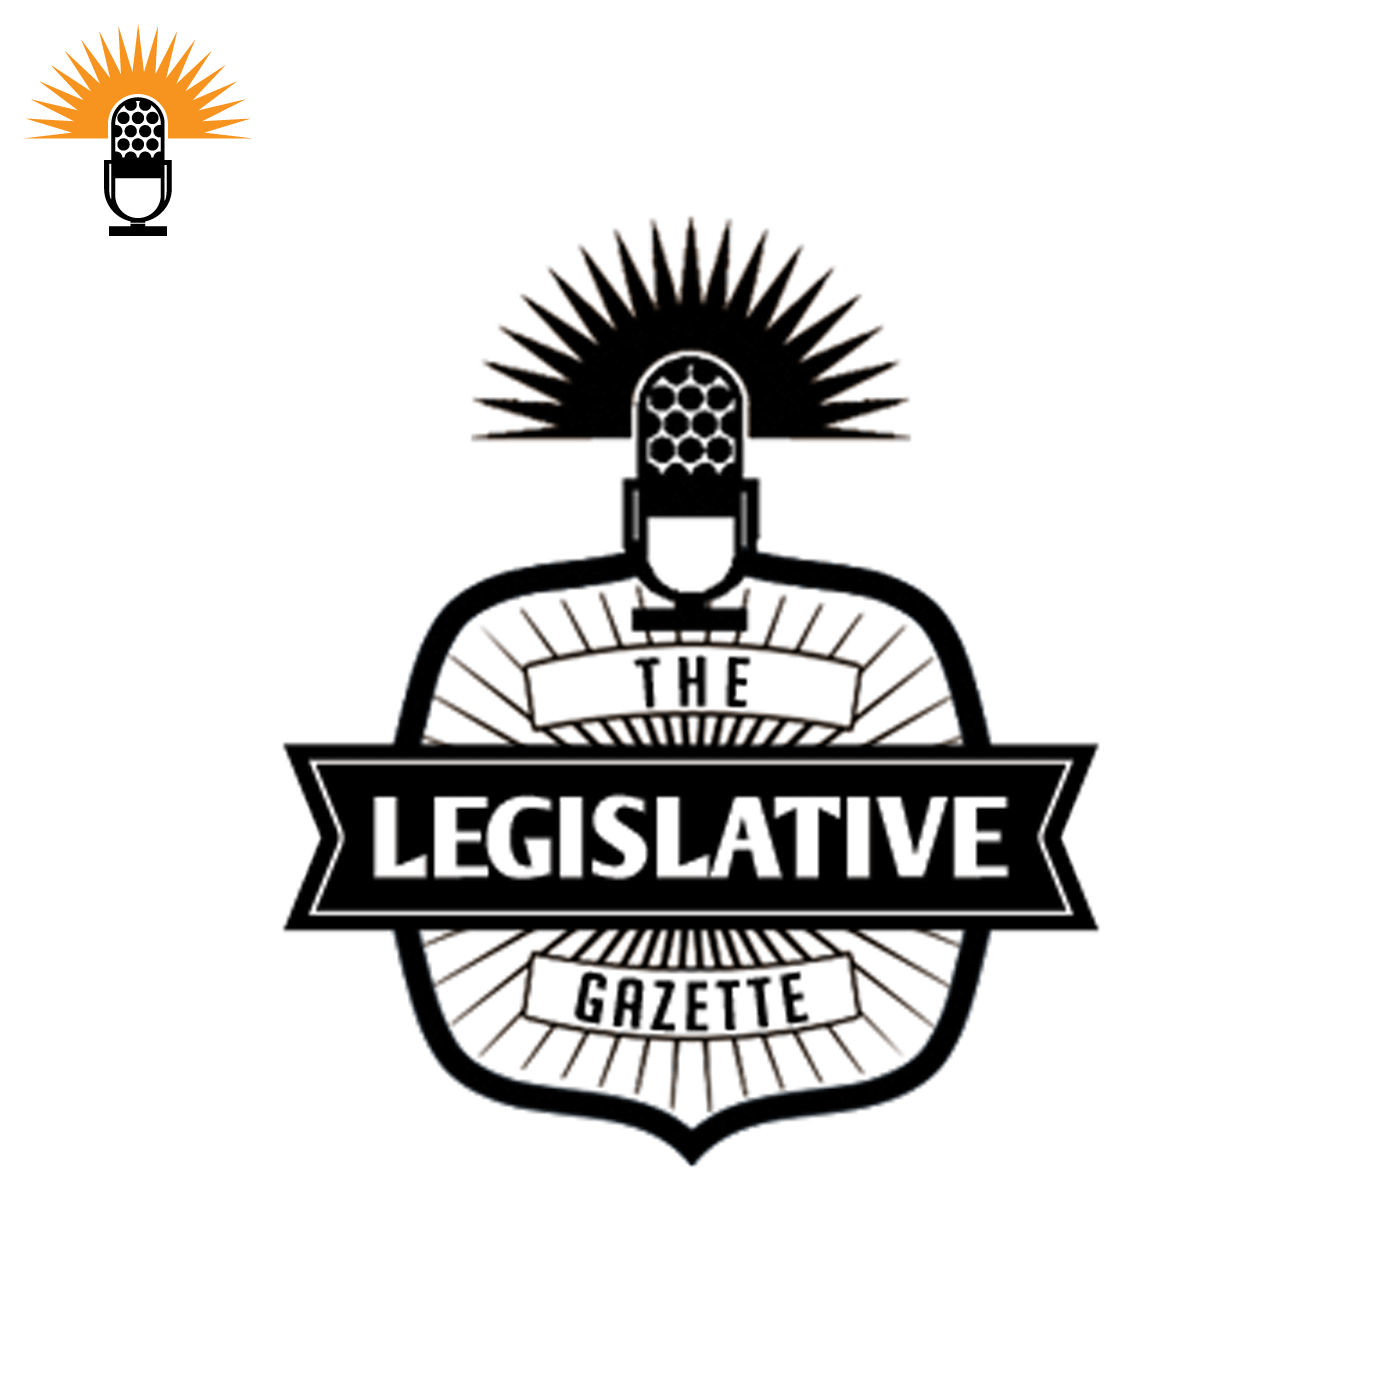 The Legislative Gazette - we’ll focus on the New York Heat Act, a proposal that did not make it into the state budget